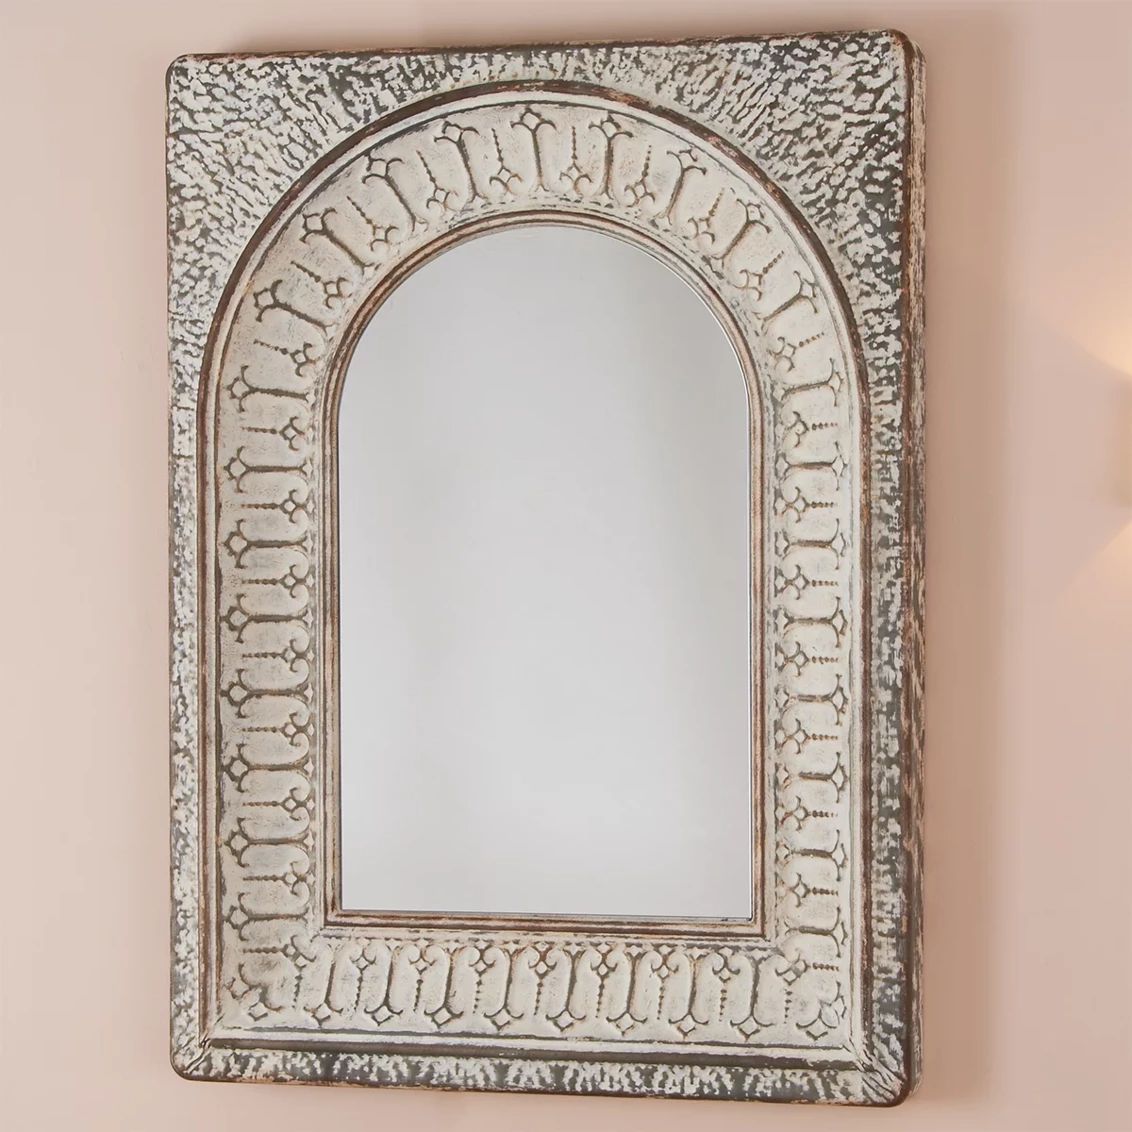 Moroccan Arch Mirror | Shades of Light